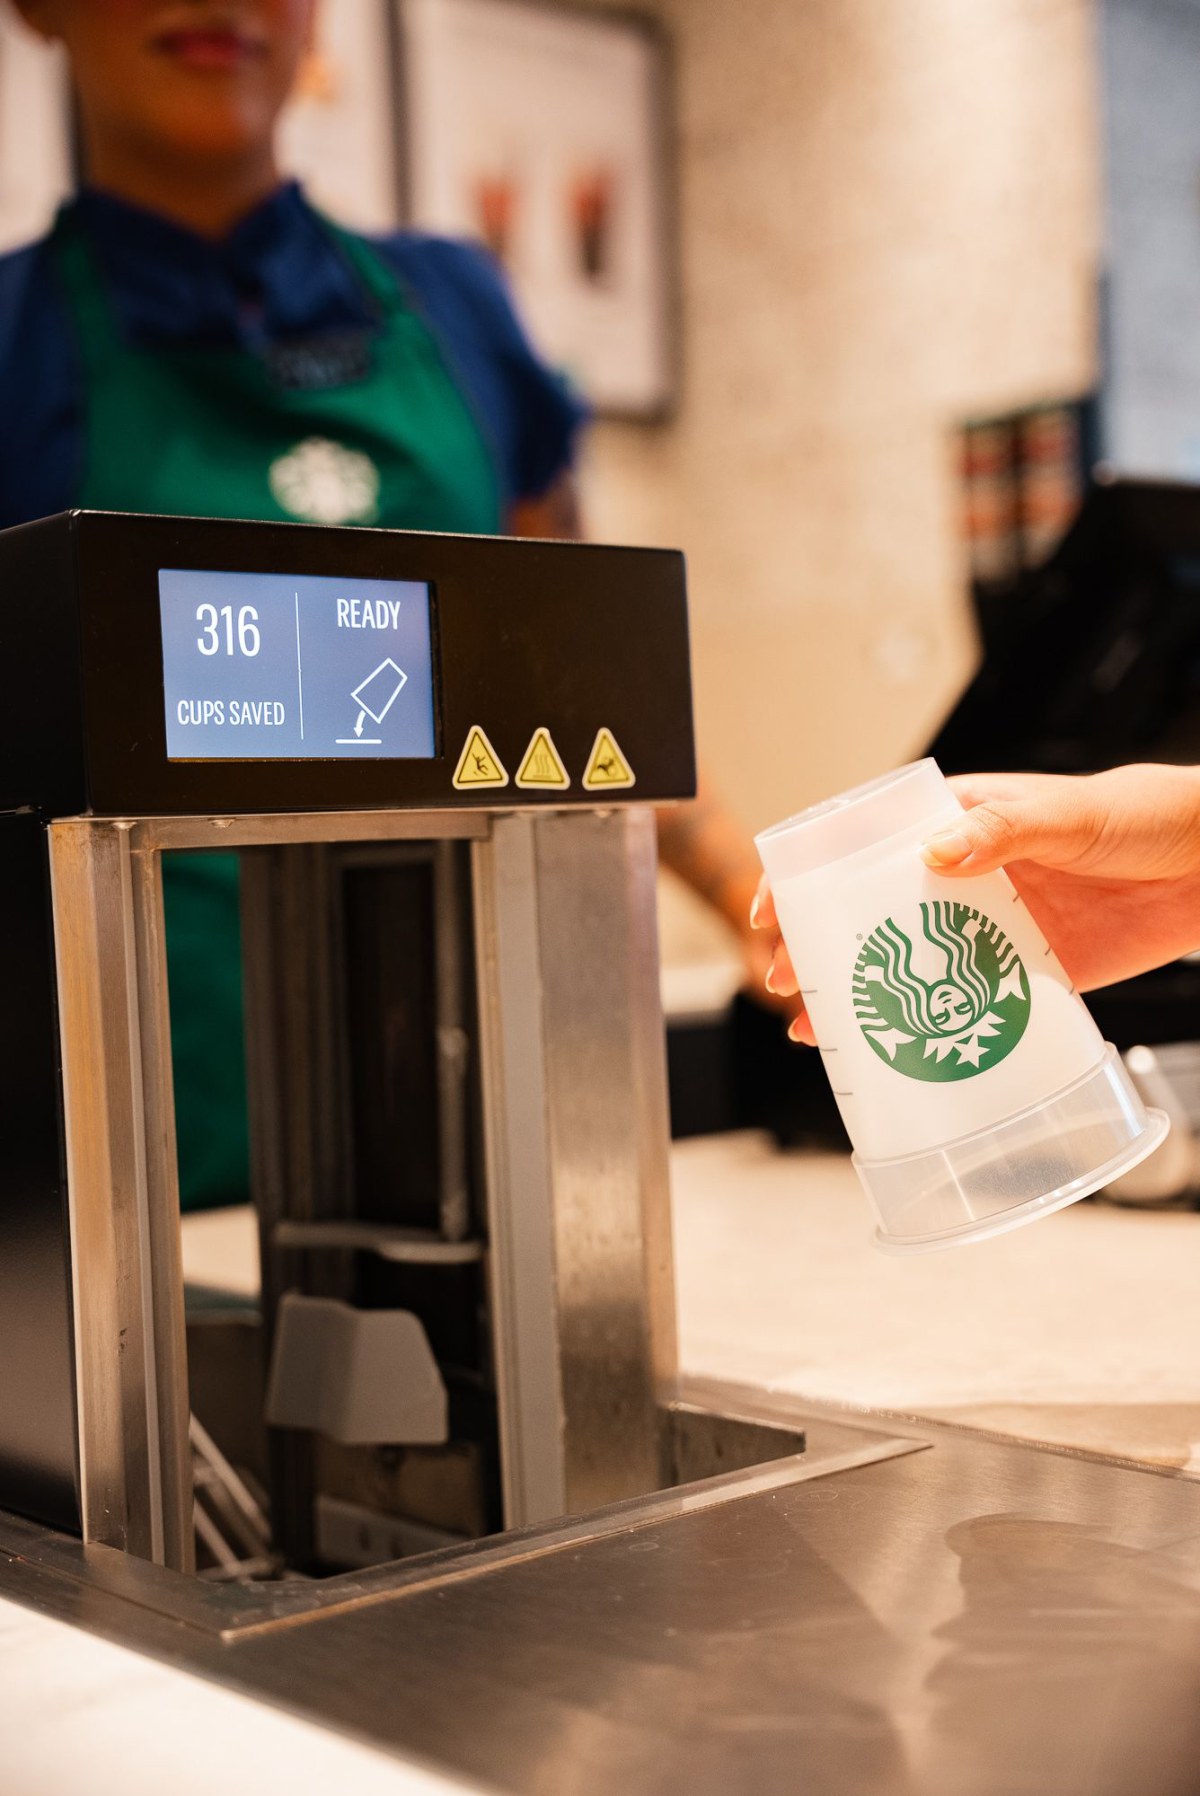 Can You Bring Your Own Reusable Cup to Starbucks?